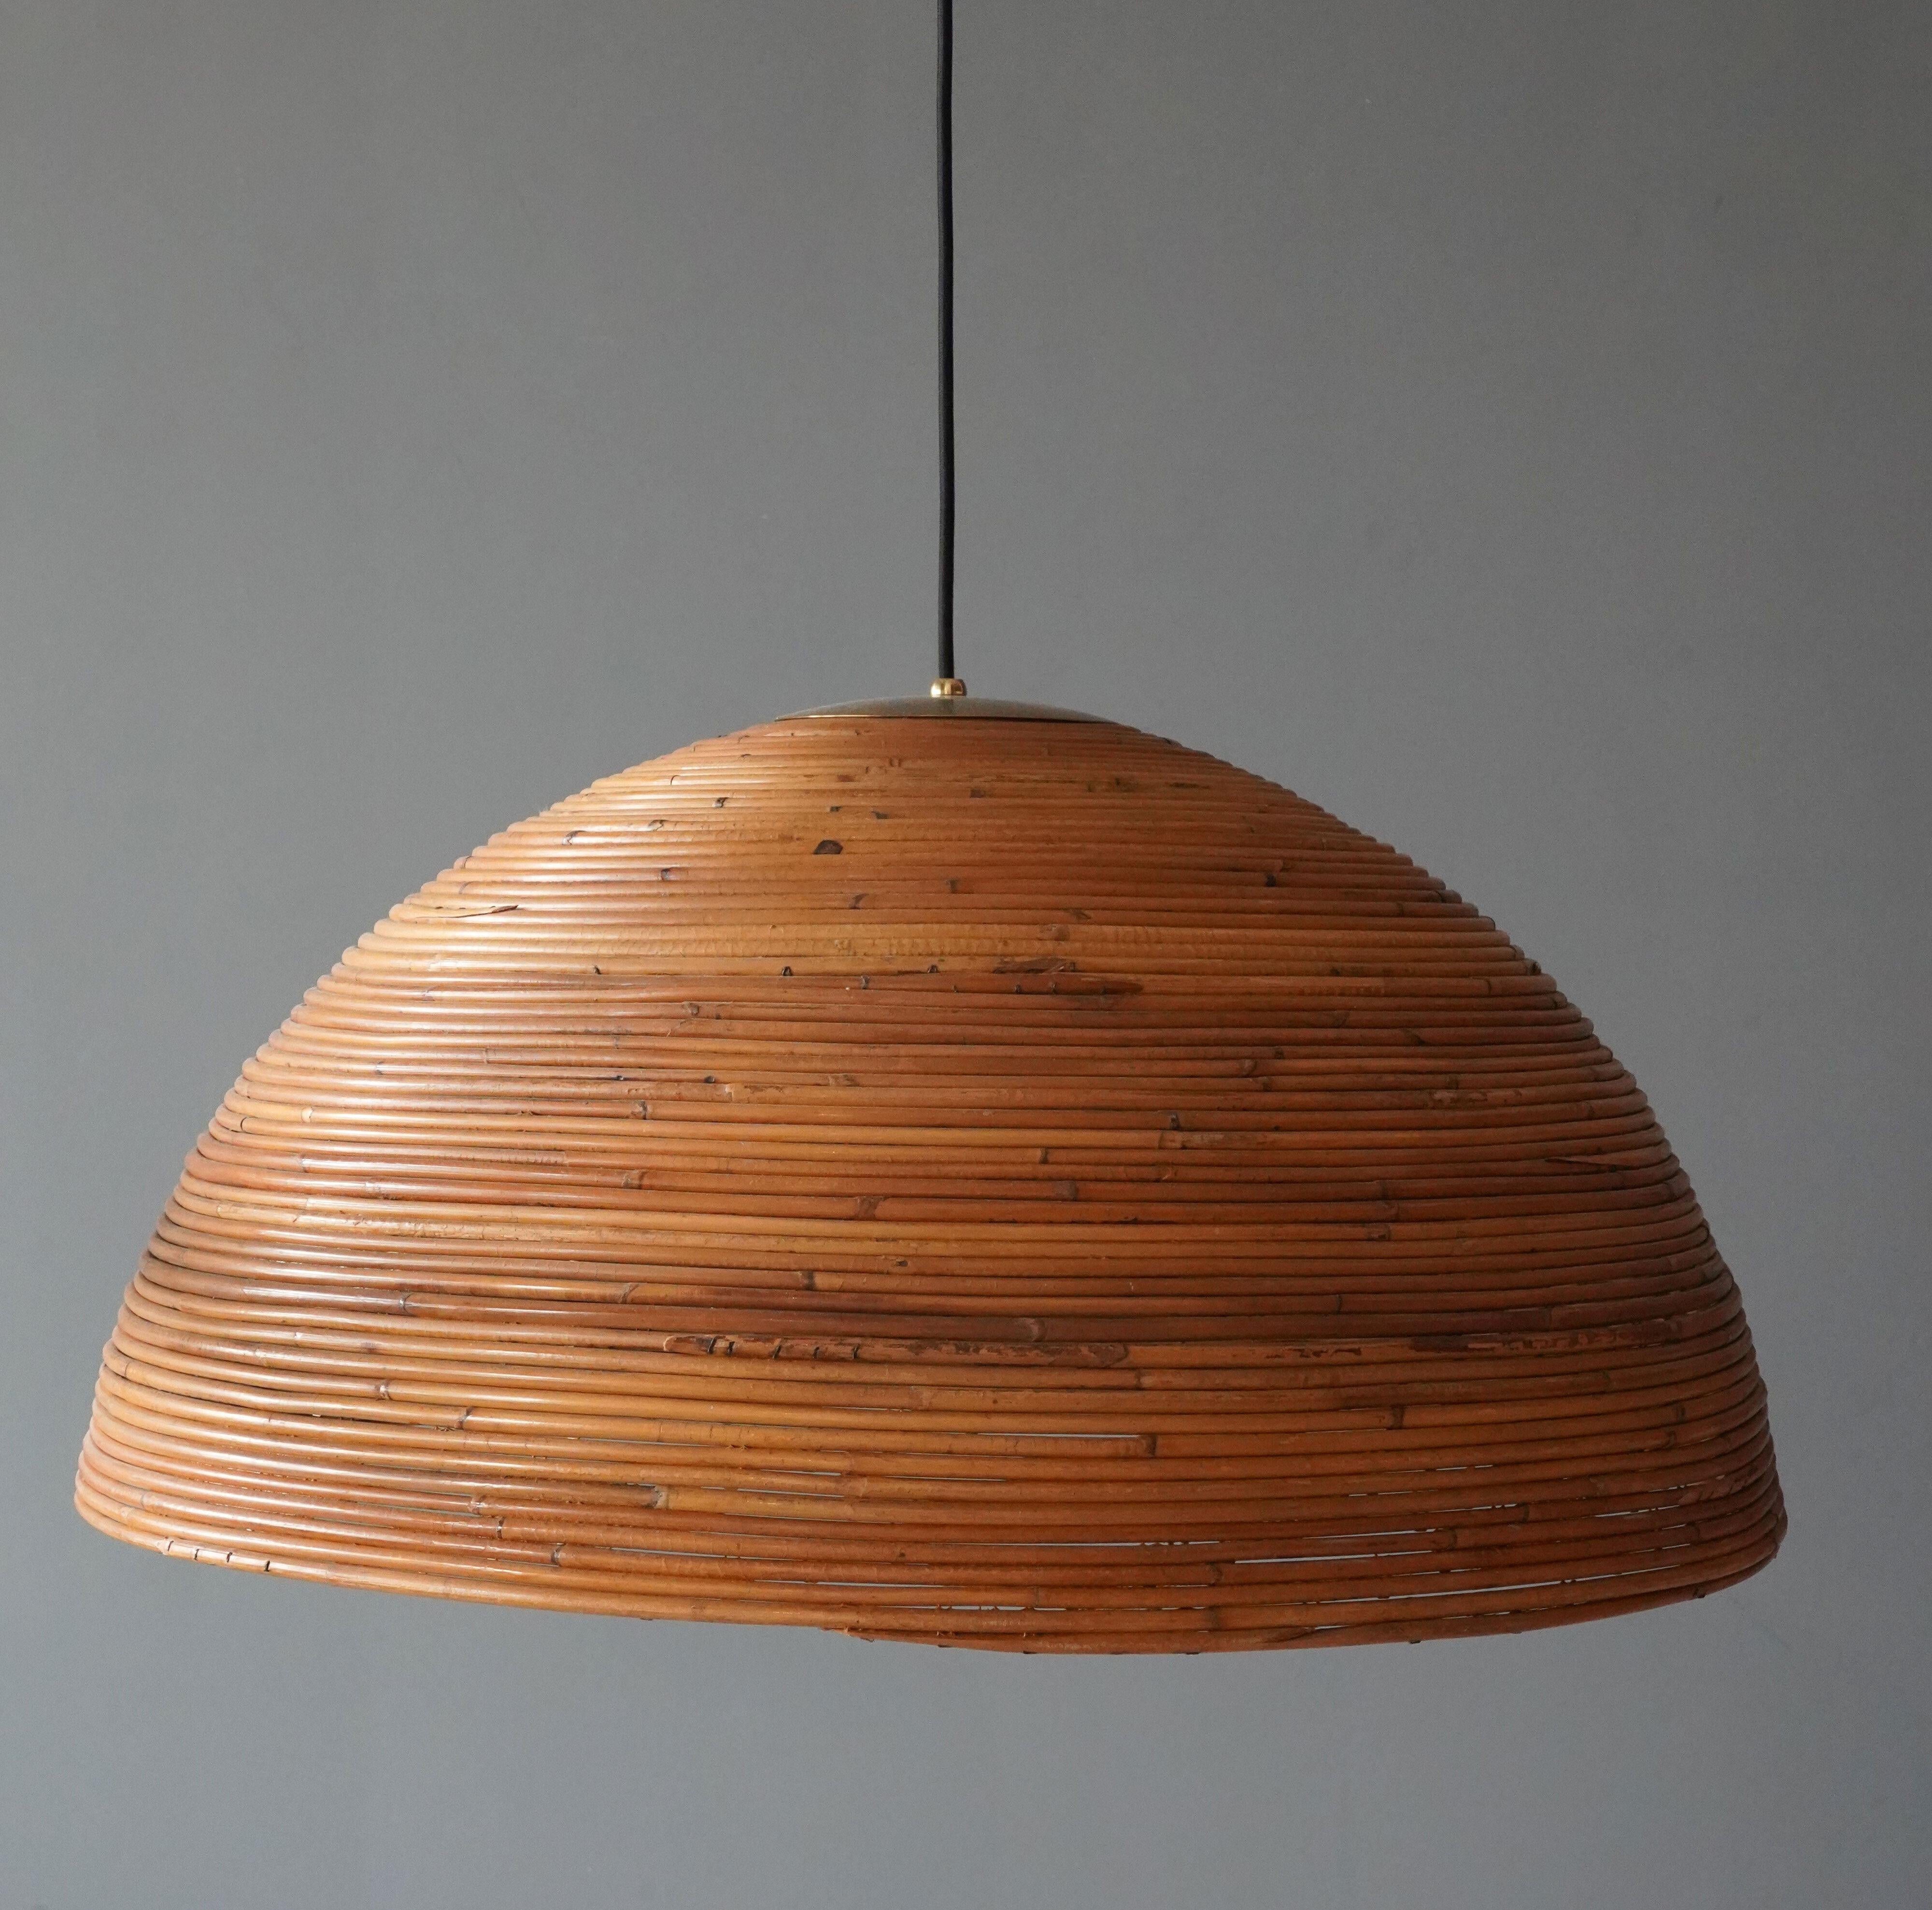 A large pendant light, produced in Italy, 1970s. Bamboo lampshade, brass hardware. Lacquered metal ceiling rose.

Stated height measured of pendant part. 

Other designers of the period include Gio Ponti, Fontana Arte, Max Ingrand, Franco